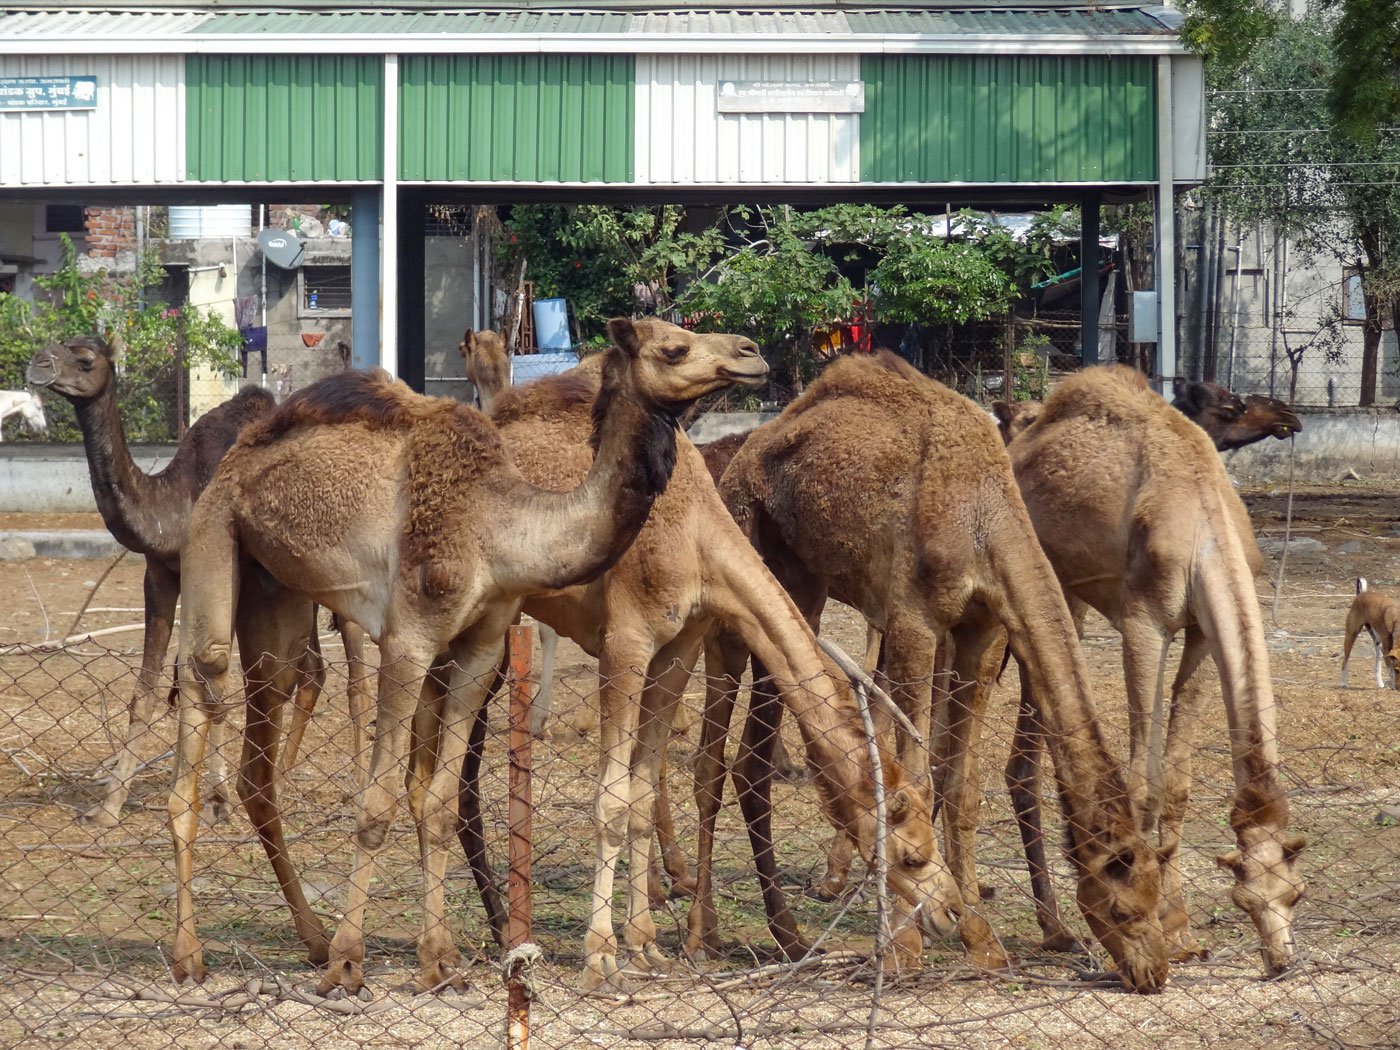 The camels, all male and between two and five years in age, are in the custody of a cow shelter in Amravati city